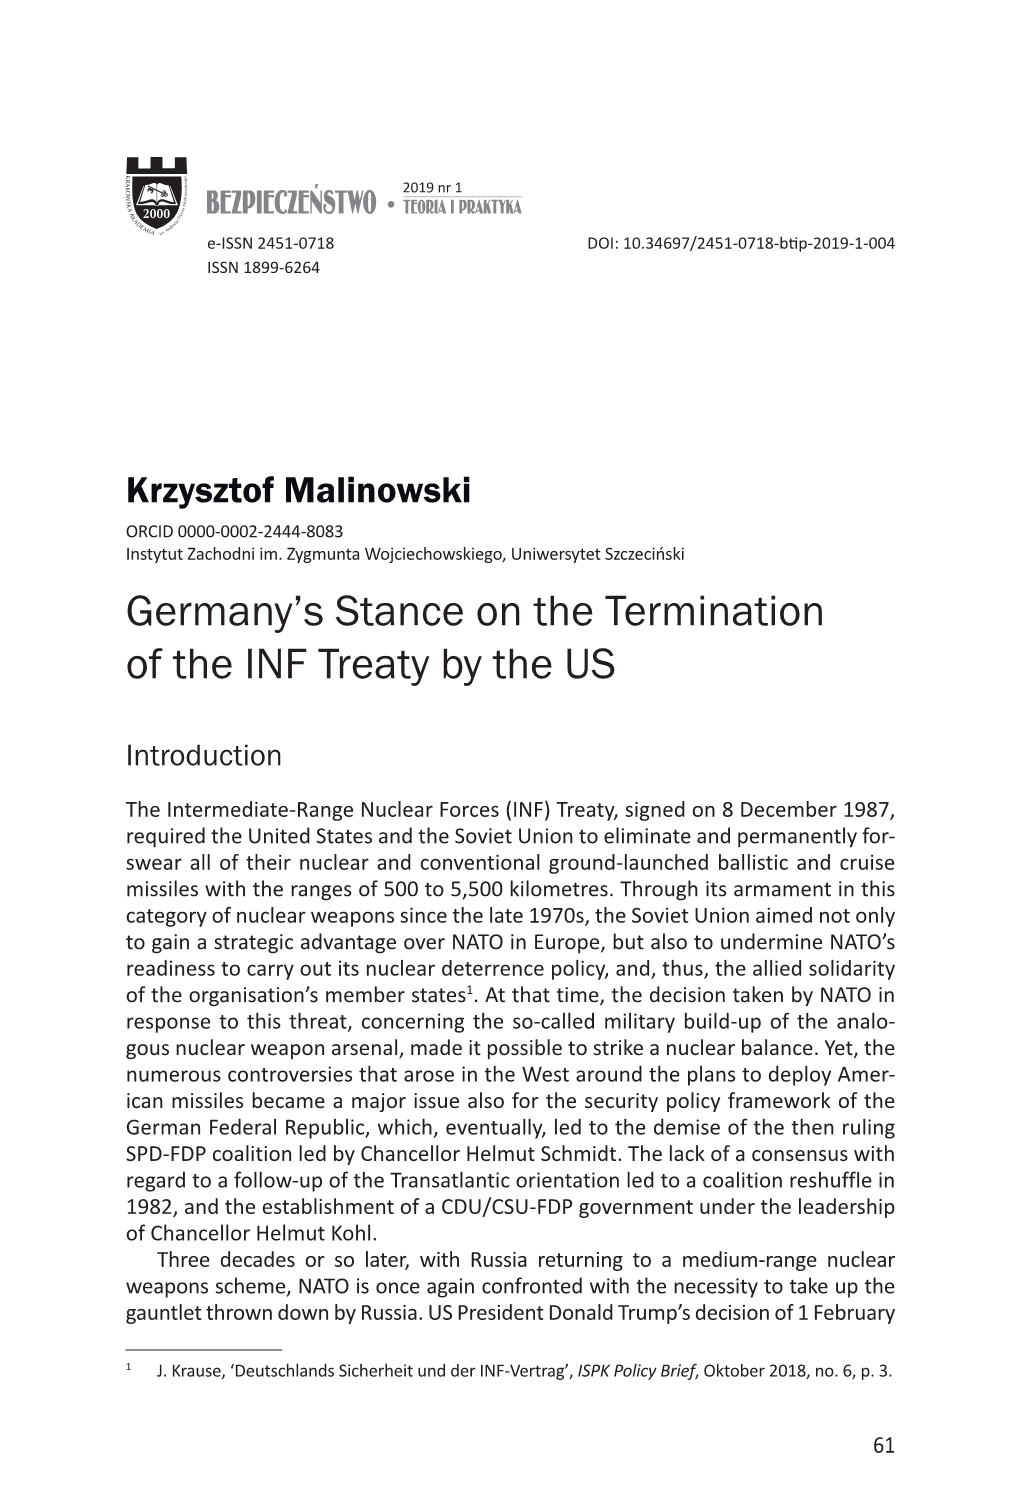 Germany's Stance on the Termination of the INF Treaty by the US